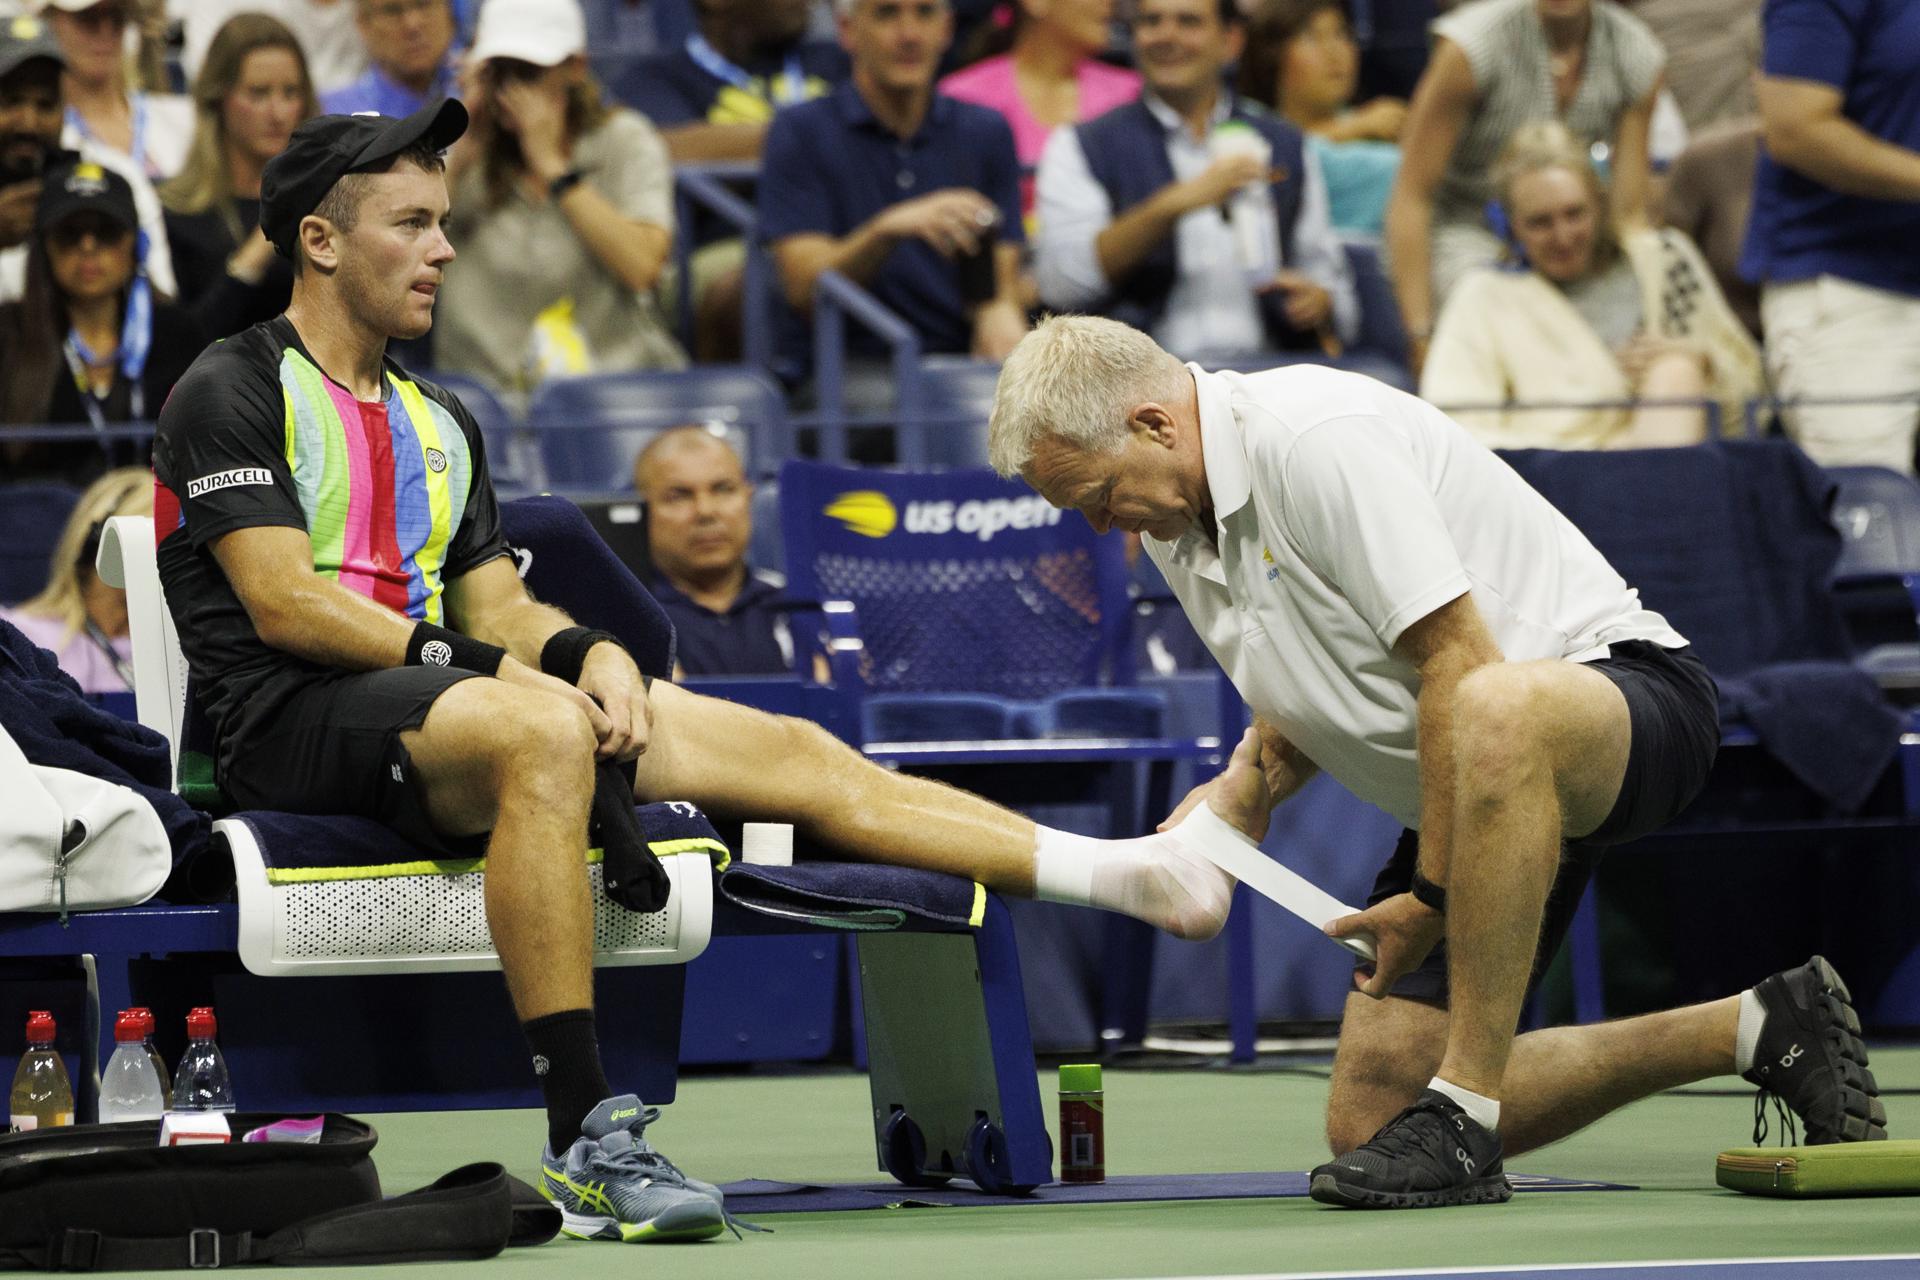 Dominik Koepfer of Germany (L) has his foot wrapped by a medical attendent after taking an injury time out during his first round match against Carlos Alcaraz of Spain at the US Open Tennis Championships at the USTA National Tennis Center in Flushing Meadows, New York, USA, 29 August 2023. EFE-EPA/CJ GUNTHER
